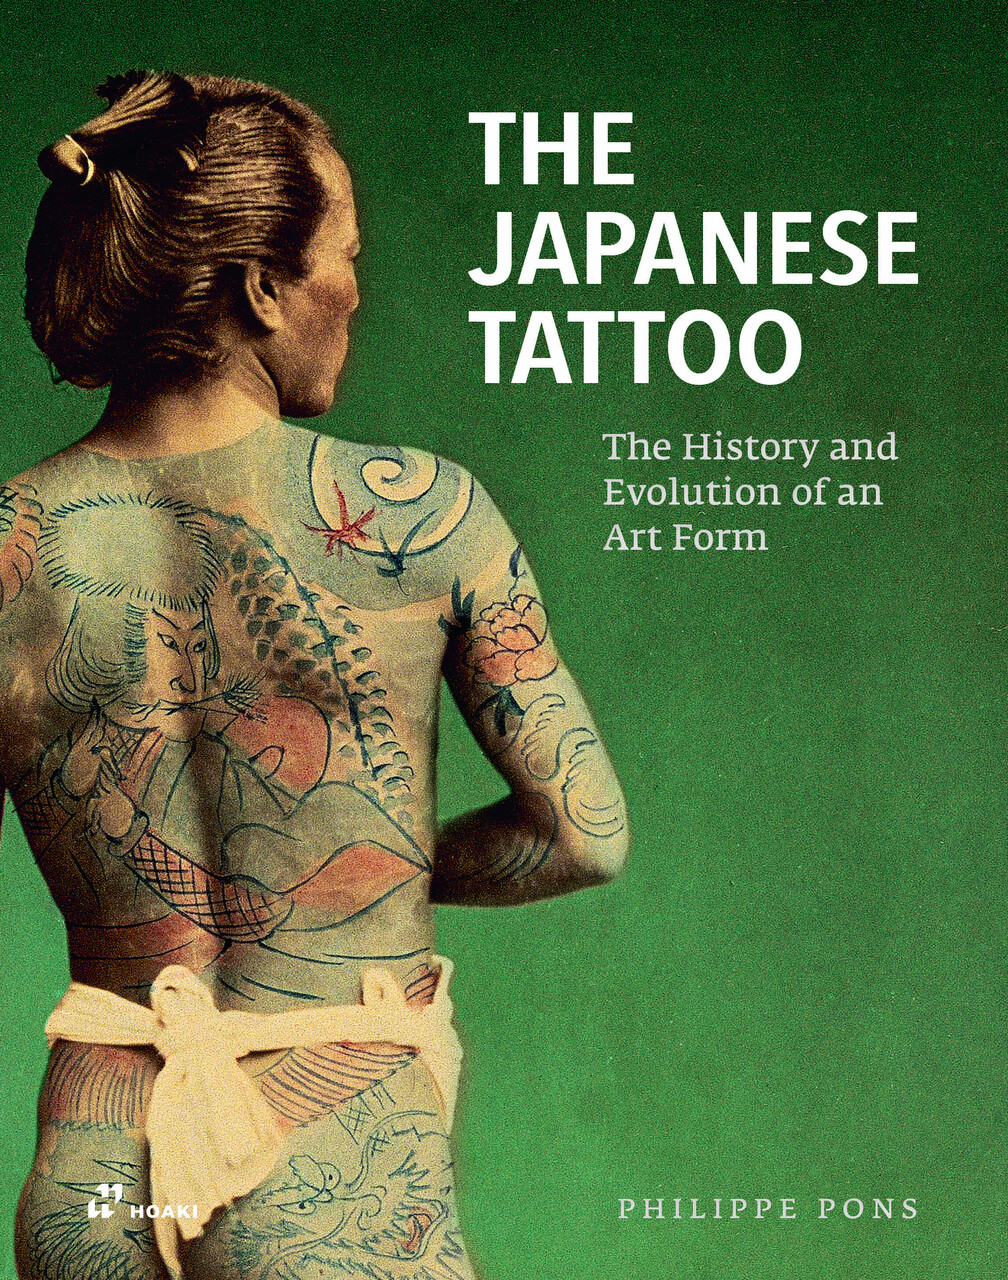 1870 Japanese Tattooed Man Tattoo History Irezumi Tattoo Shop Wall Art  Decor Compatible with Vintage Compatible with Antique Fine Art Print Poster  : Amazon.ca: Home